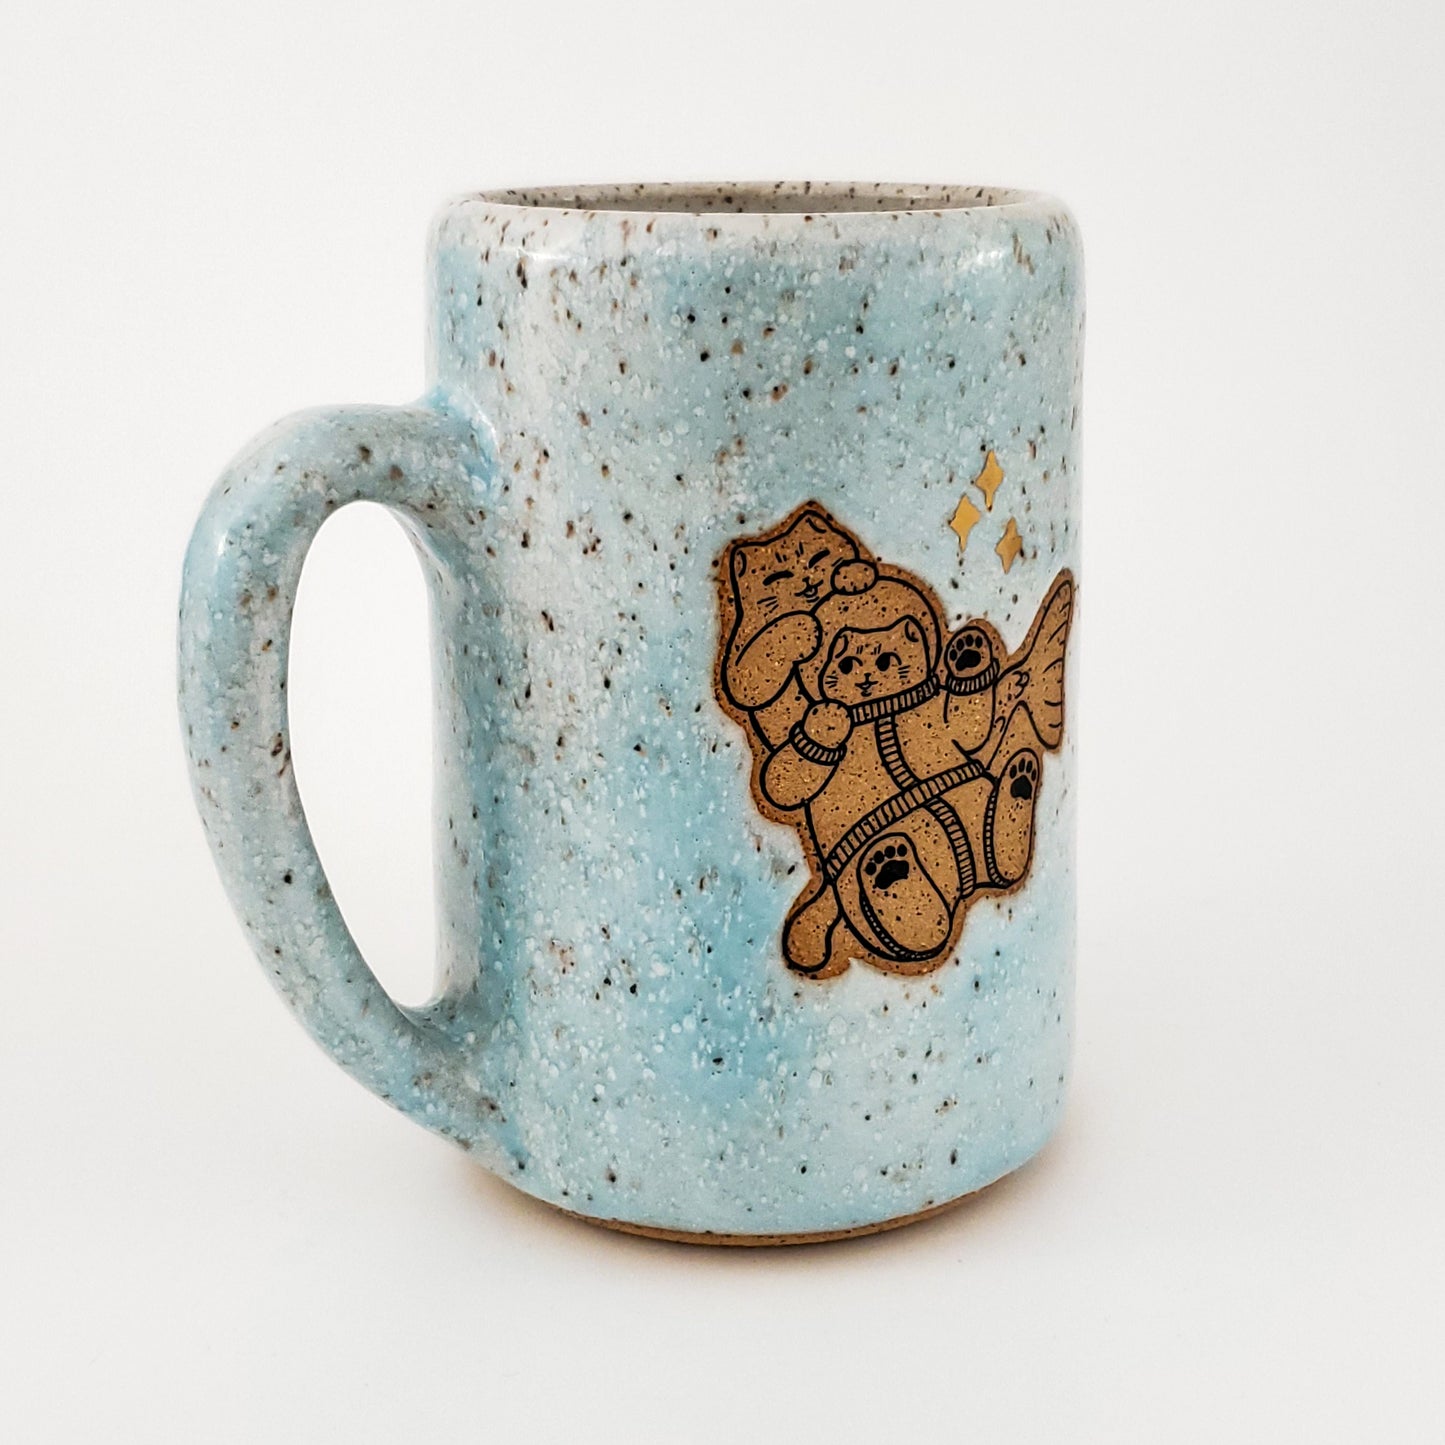 16 oz Space Boy and Prince of The Sea Mug in Blue